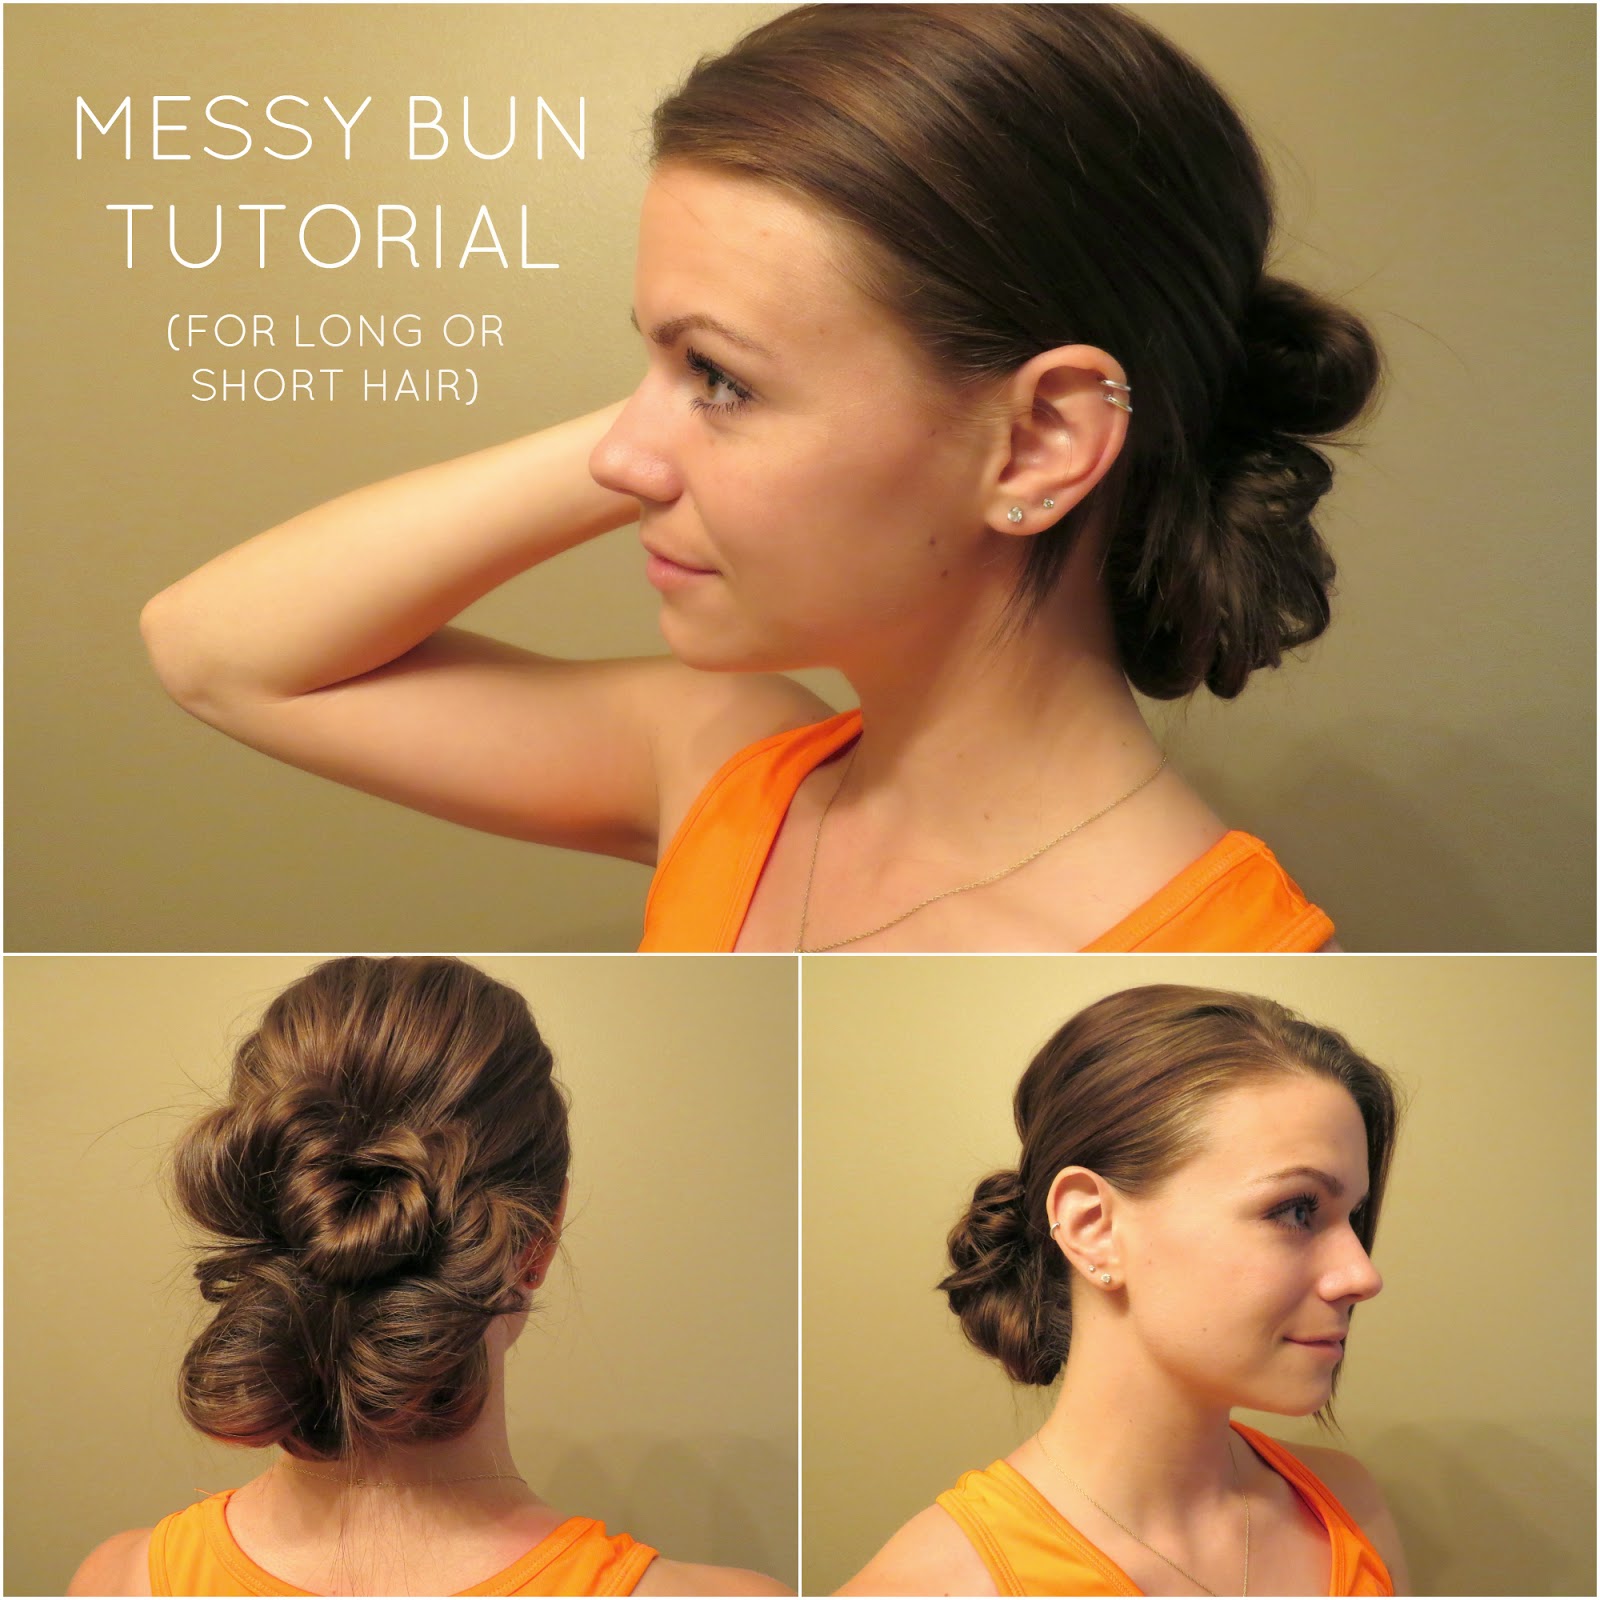 48 Messy Bun Ideas For All Kinds of Occasions
